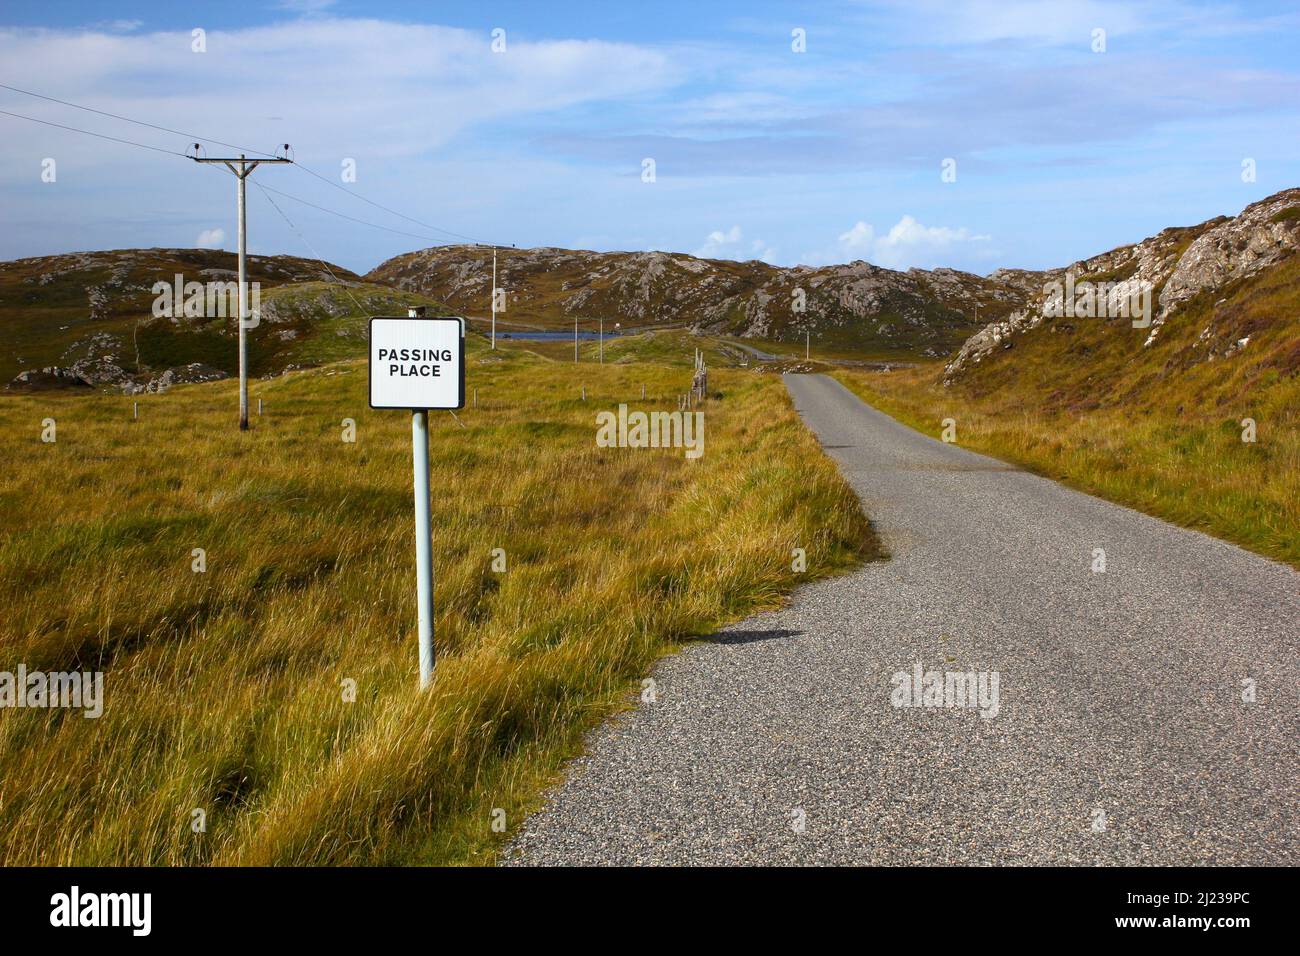 Passing place and sign on a narrow remote road in Scotland Stock Photo